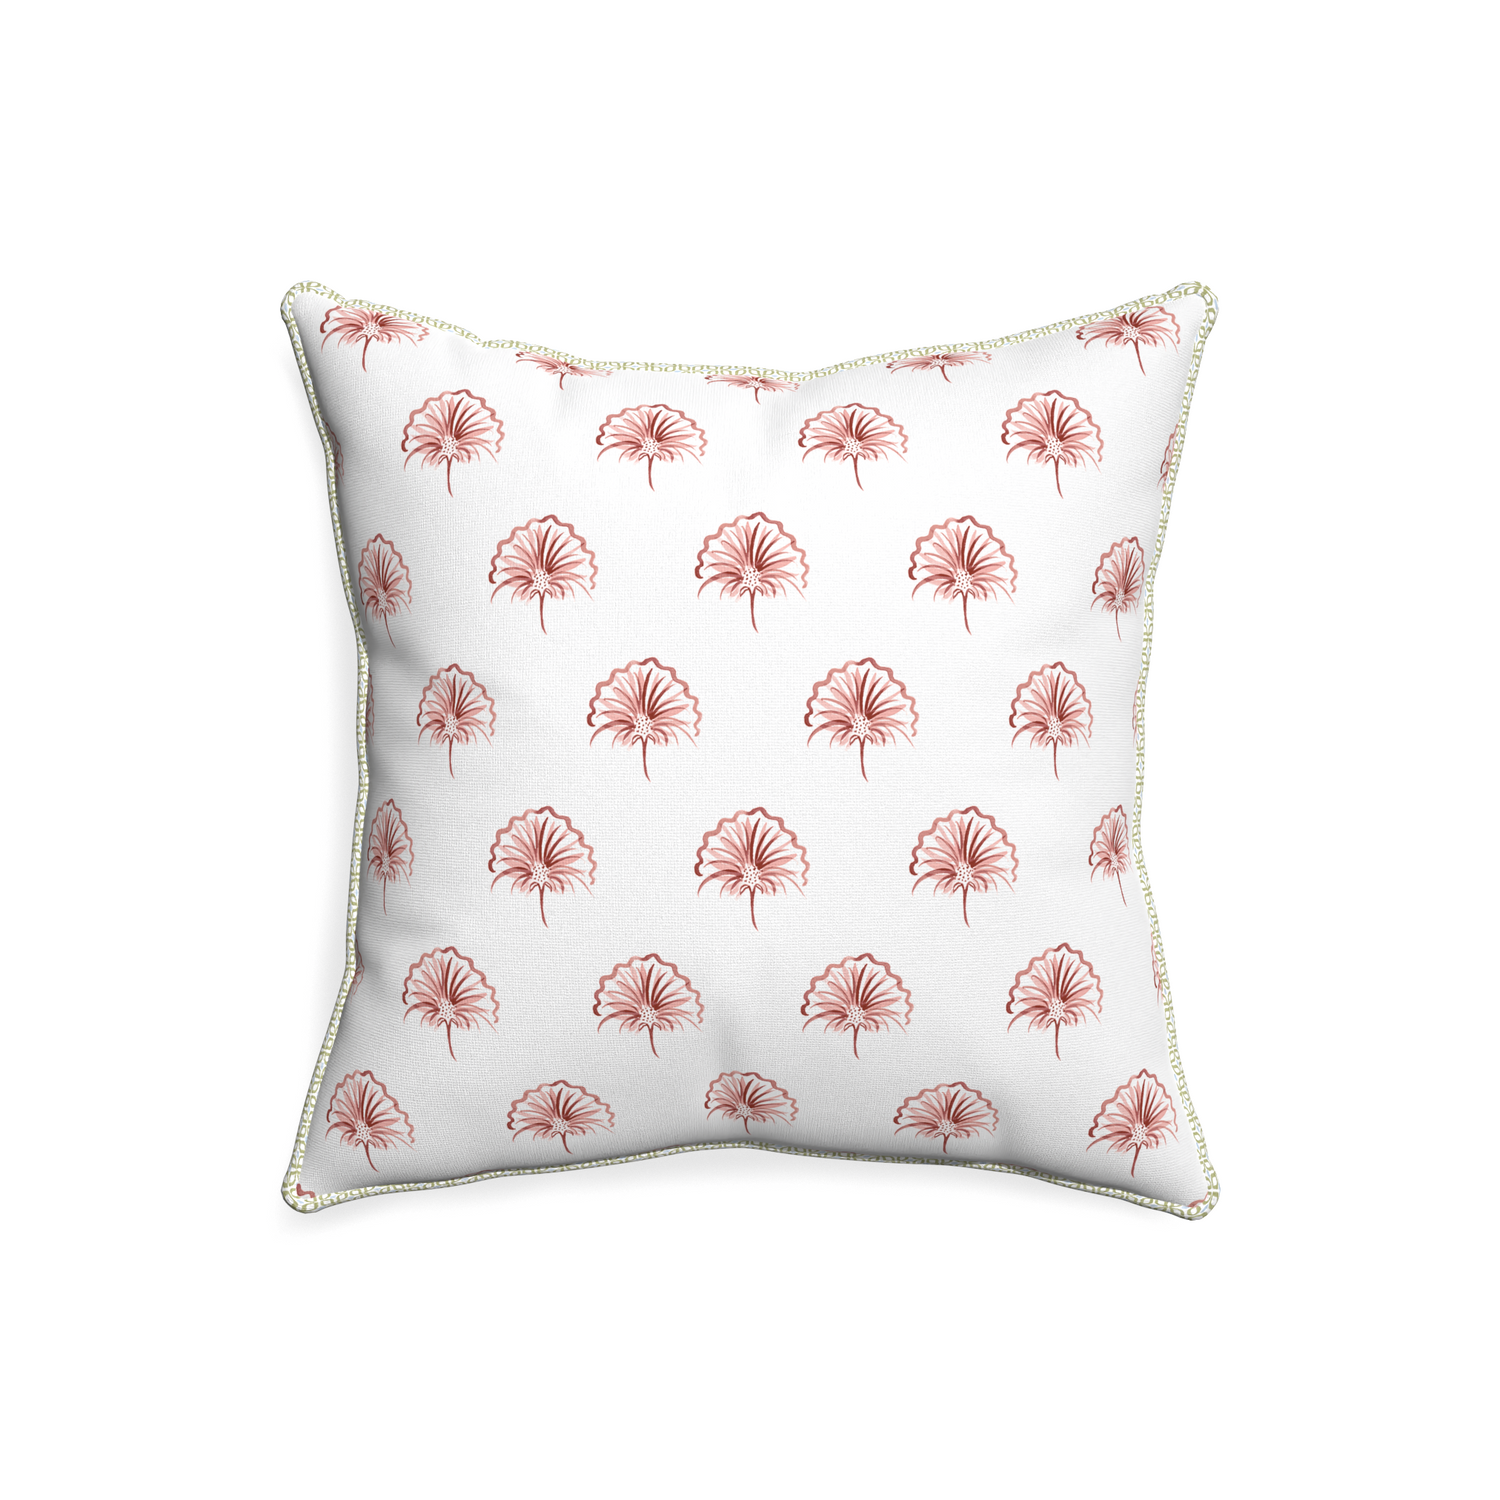 20-square penelope rose custom pillow with l piping on white background